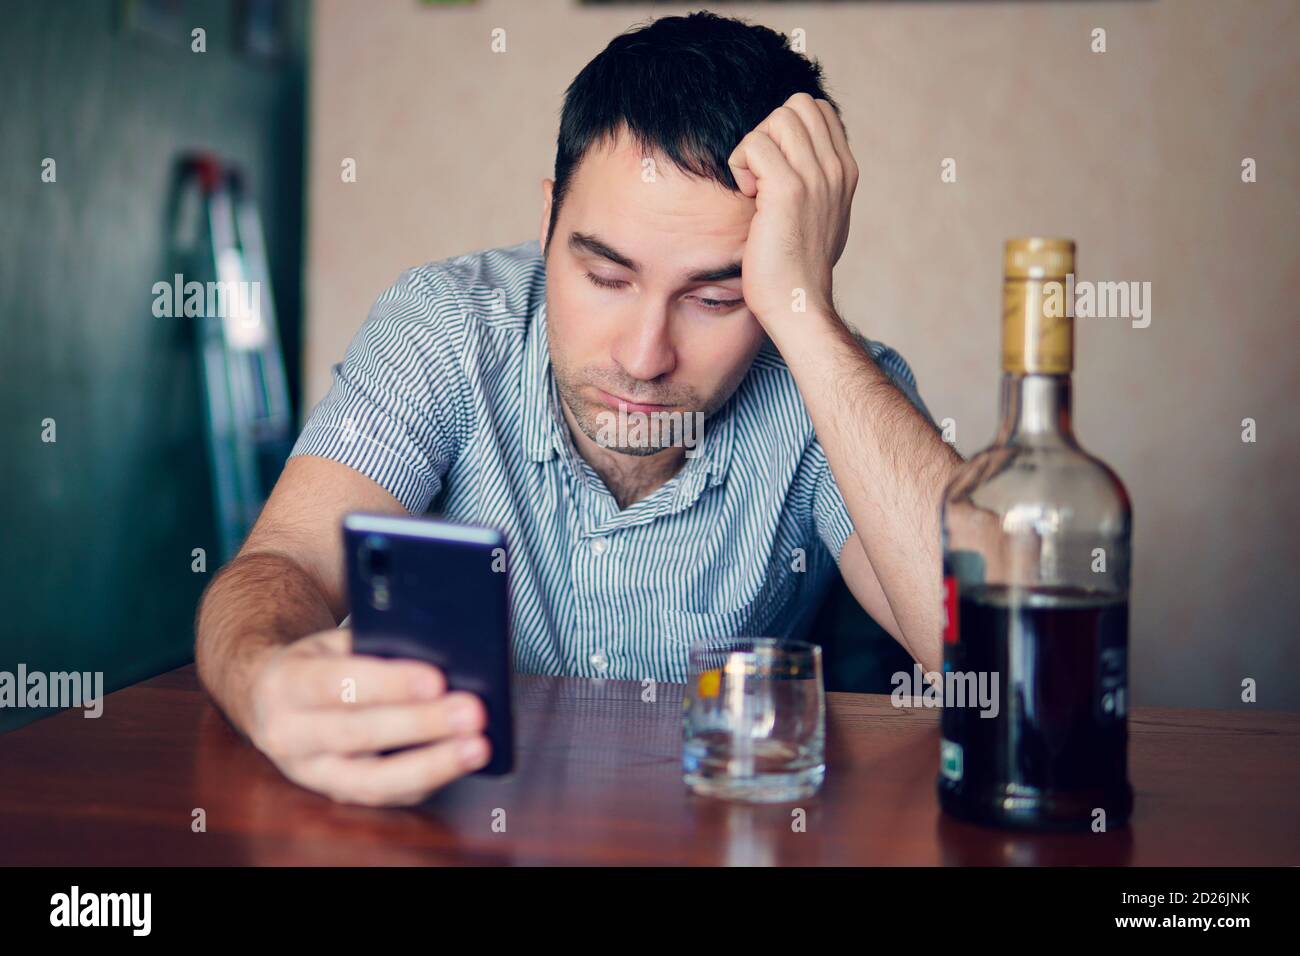 An unemployed specialist who got drunk alone out of boredom is quarantined in self-isolation. alcoholism, alcohol addiction and people concept - male Stock Photo